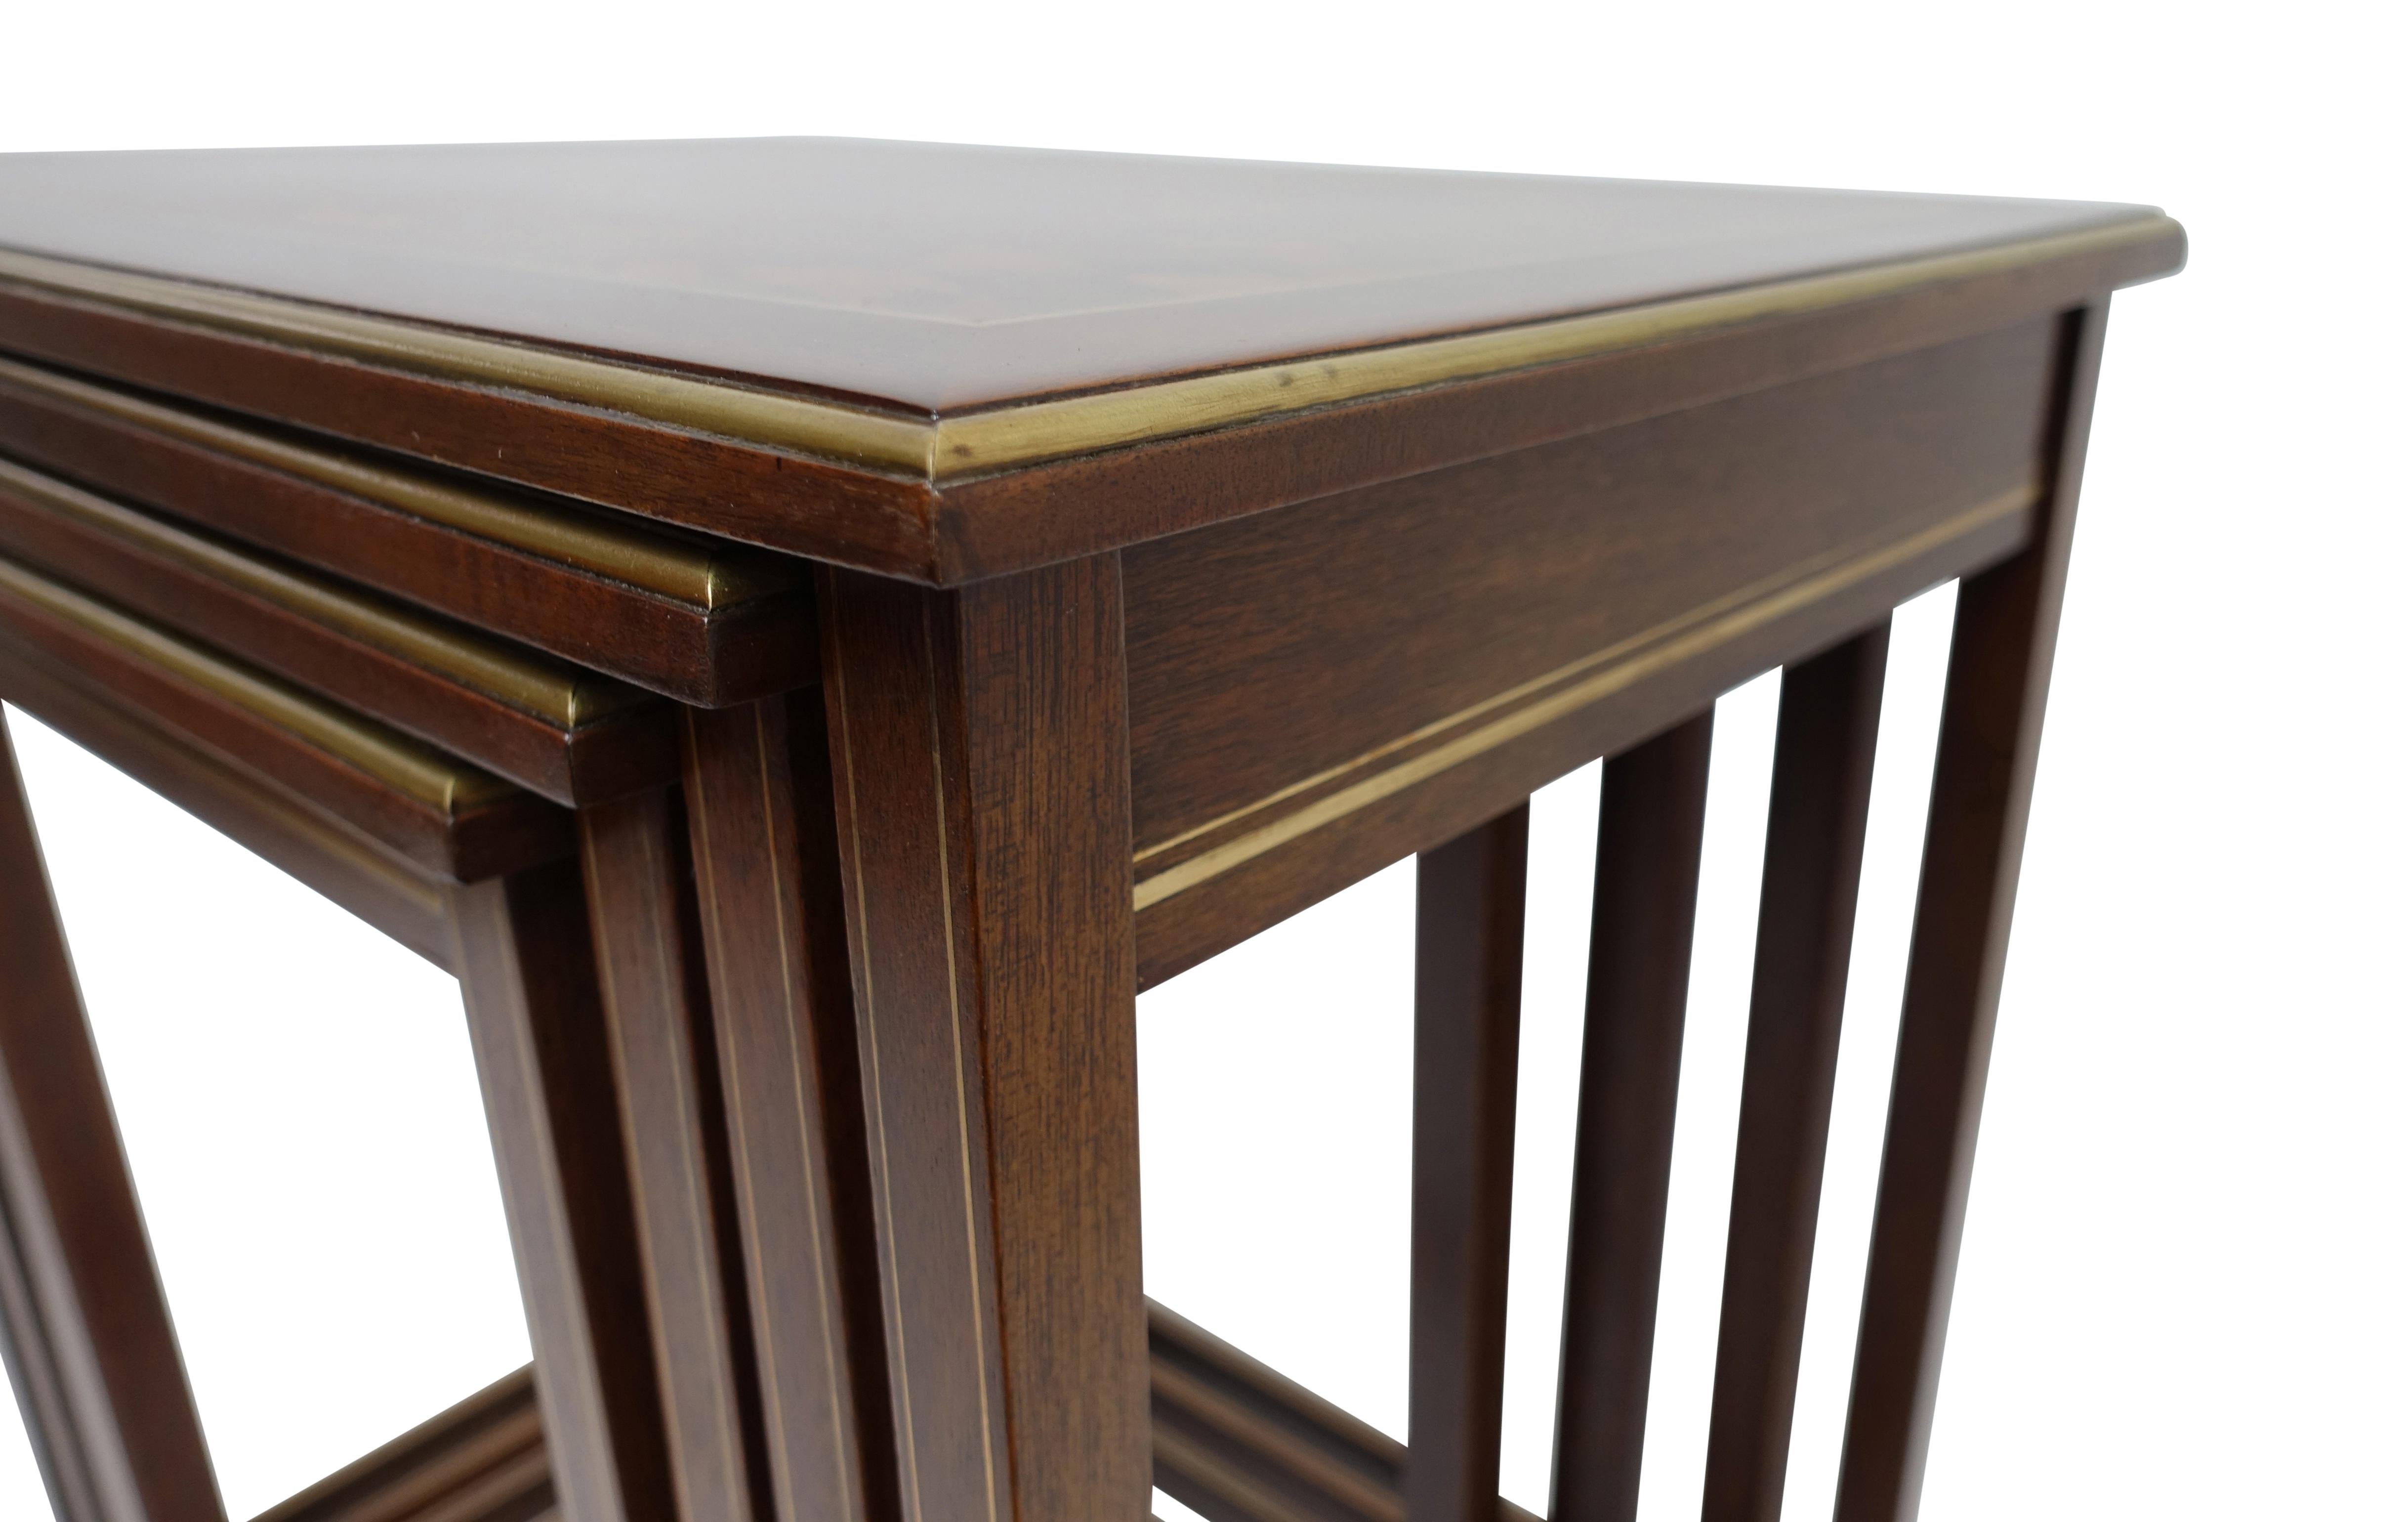 Set of Four Mahogany Nesting Tables with Brass Inlay and Trim, Mid-20th Century For Sale 1